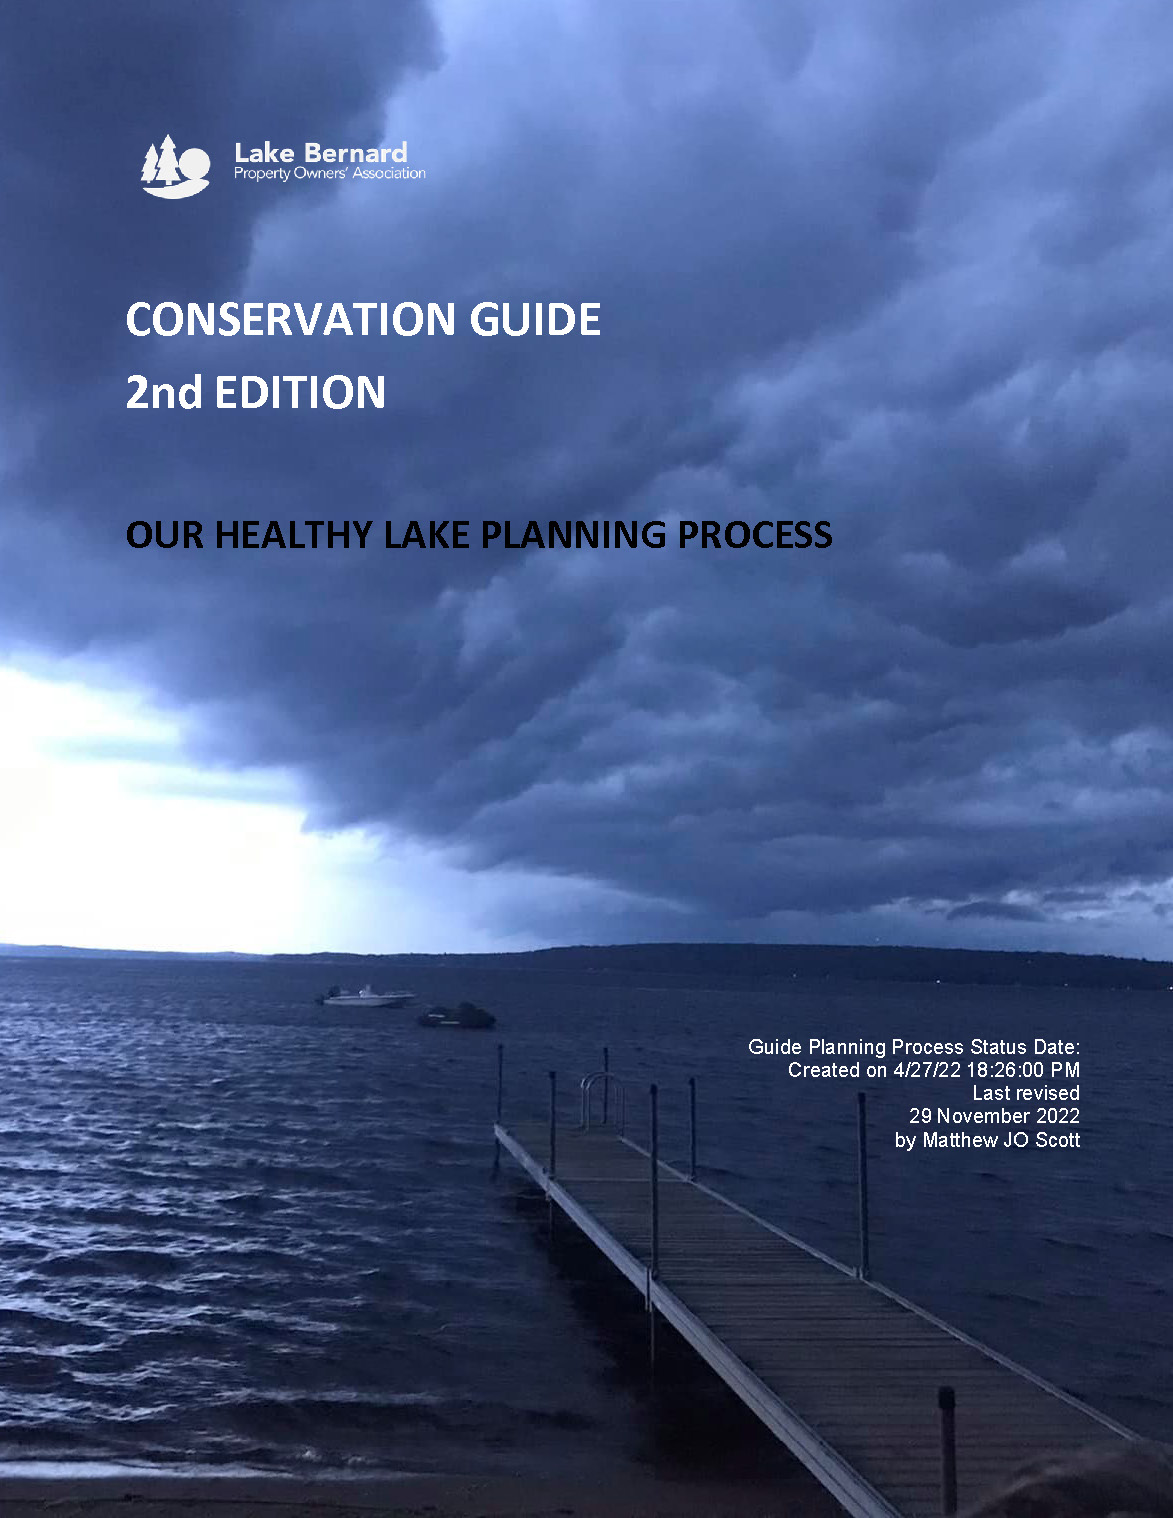 cover of the Lake Bernard Conservation Guide - Title and logo superimposed on a photo of a stormy Lake Bernard with a dock and two boats in the foreground